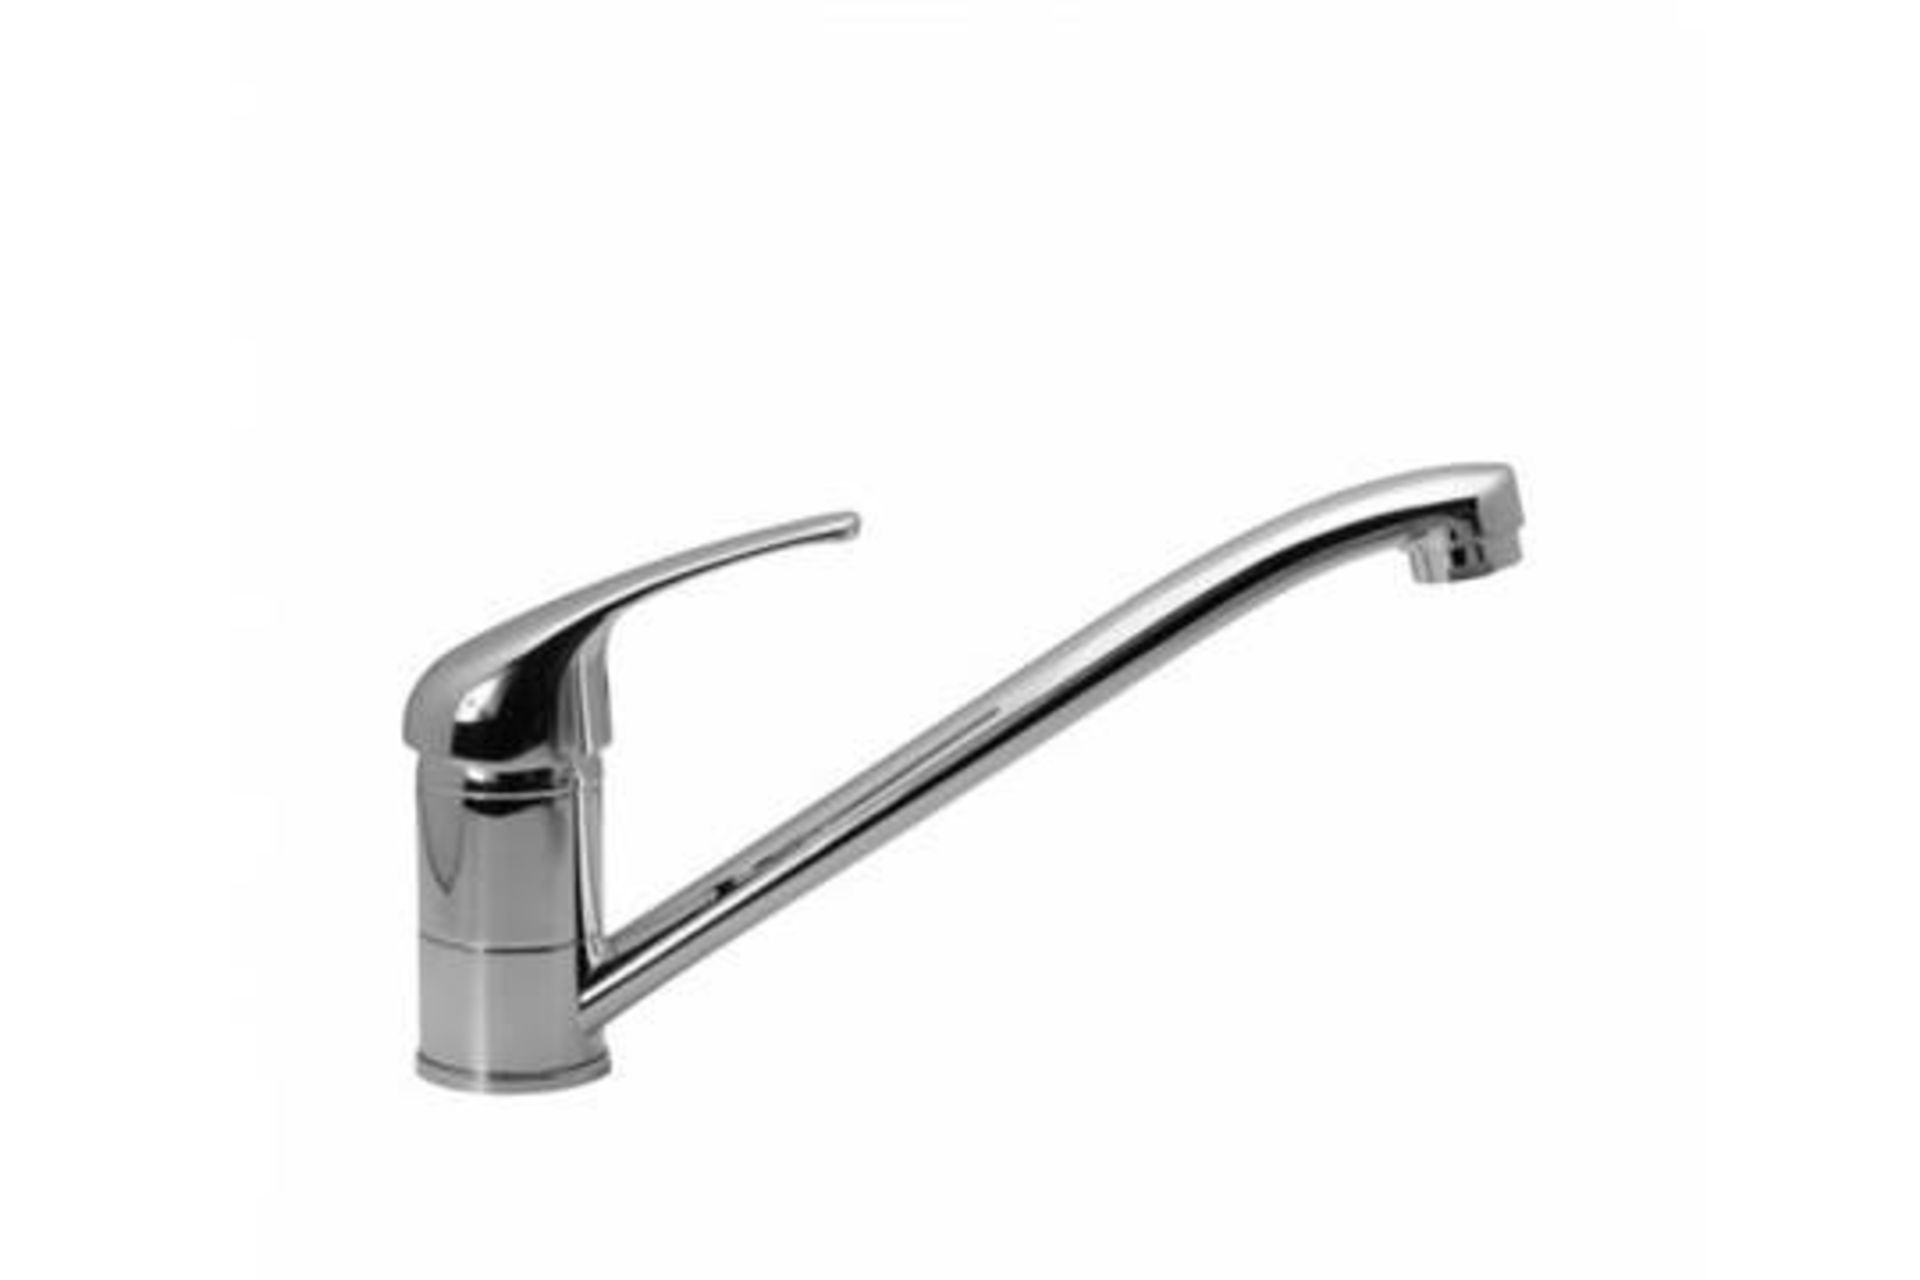 10 x Tessa Chrome Plated Kitchen Mixer Tap - Swivel Spout The lengthy, bold design of the Tessa